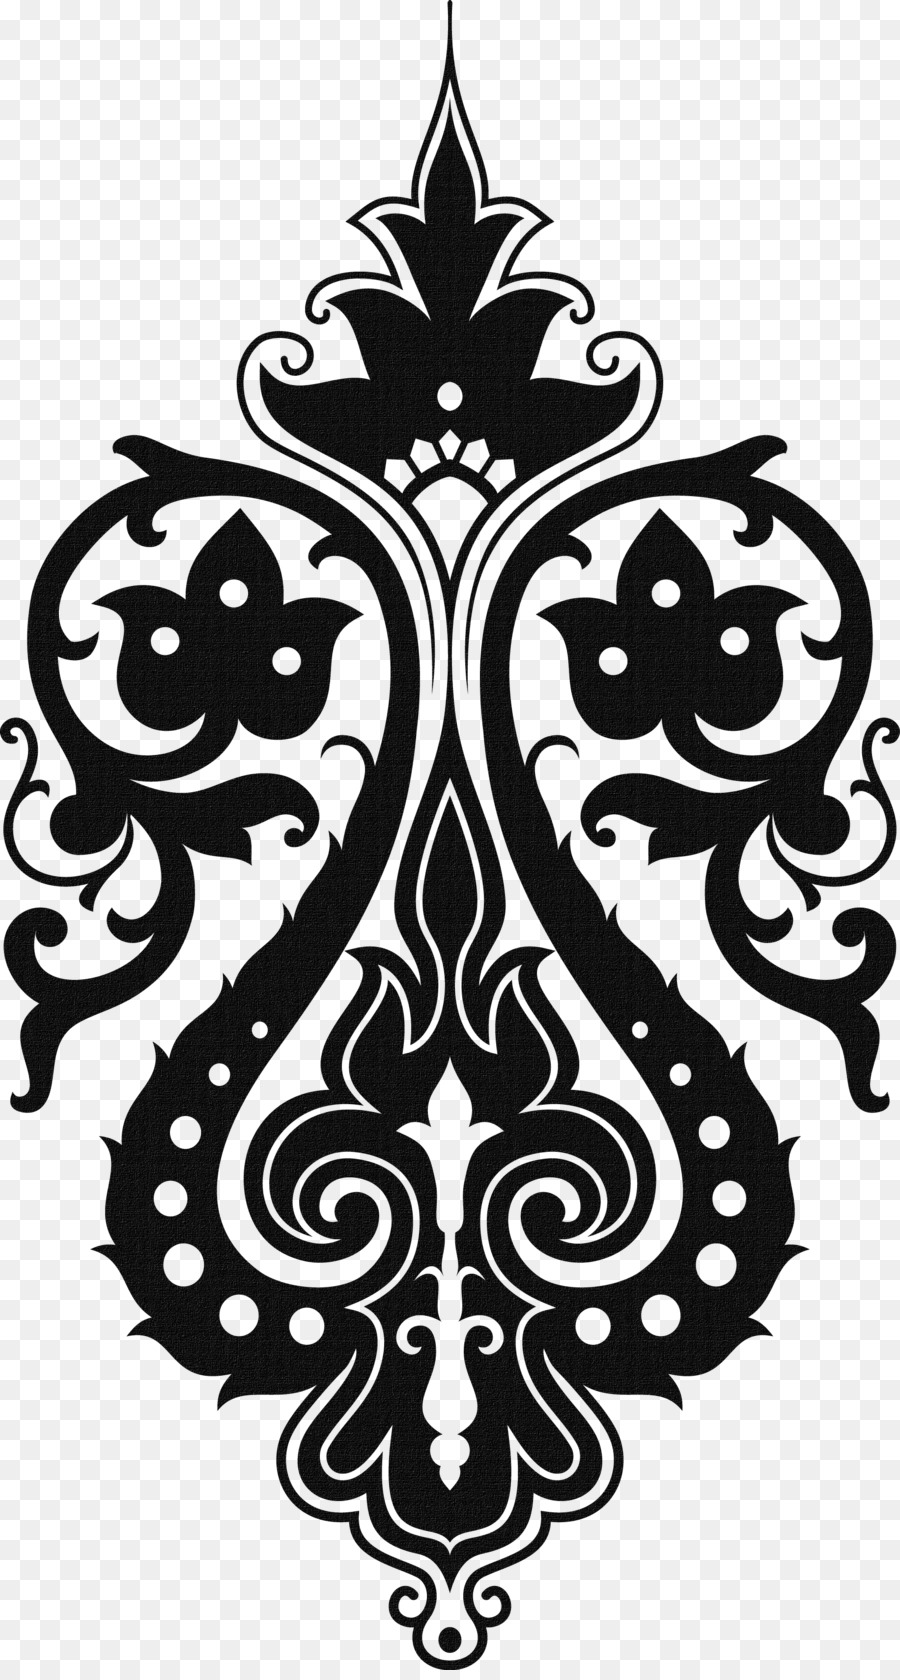 Stencil Drawing Ornament Silhouette - design png download - 1832*3400 - Free Transparent Stencil png Download.